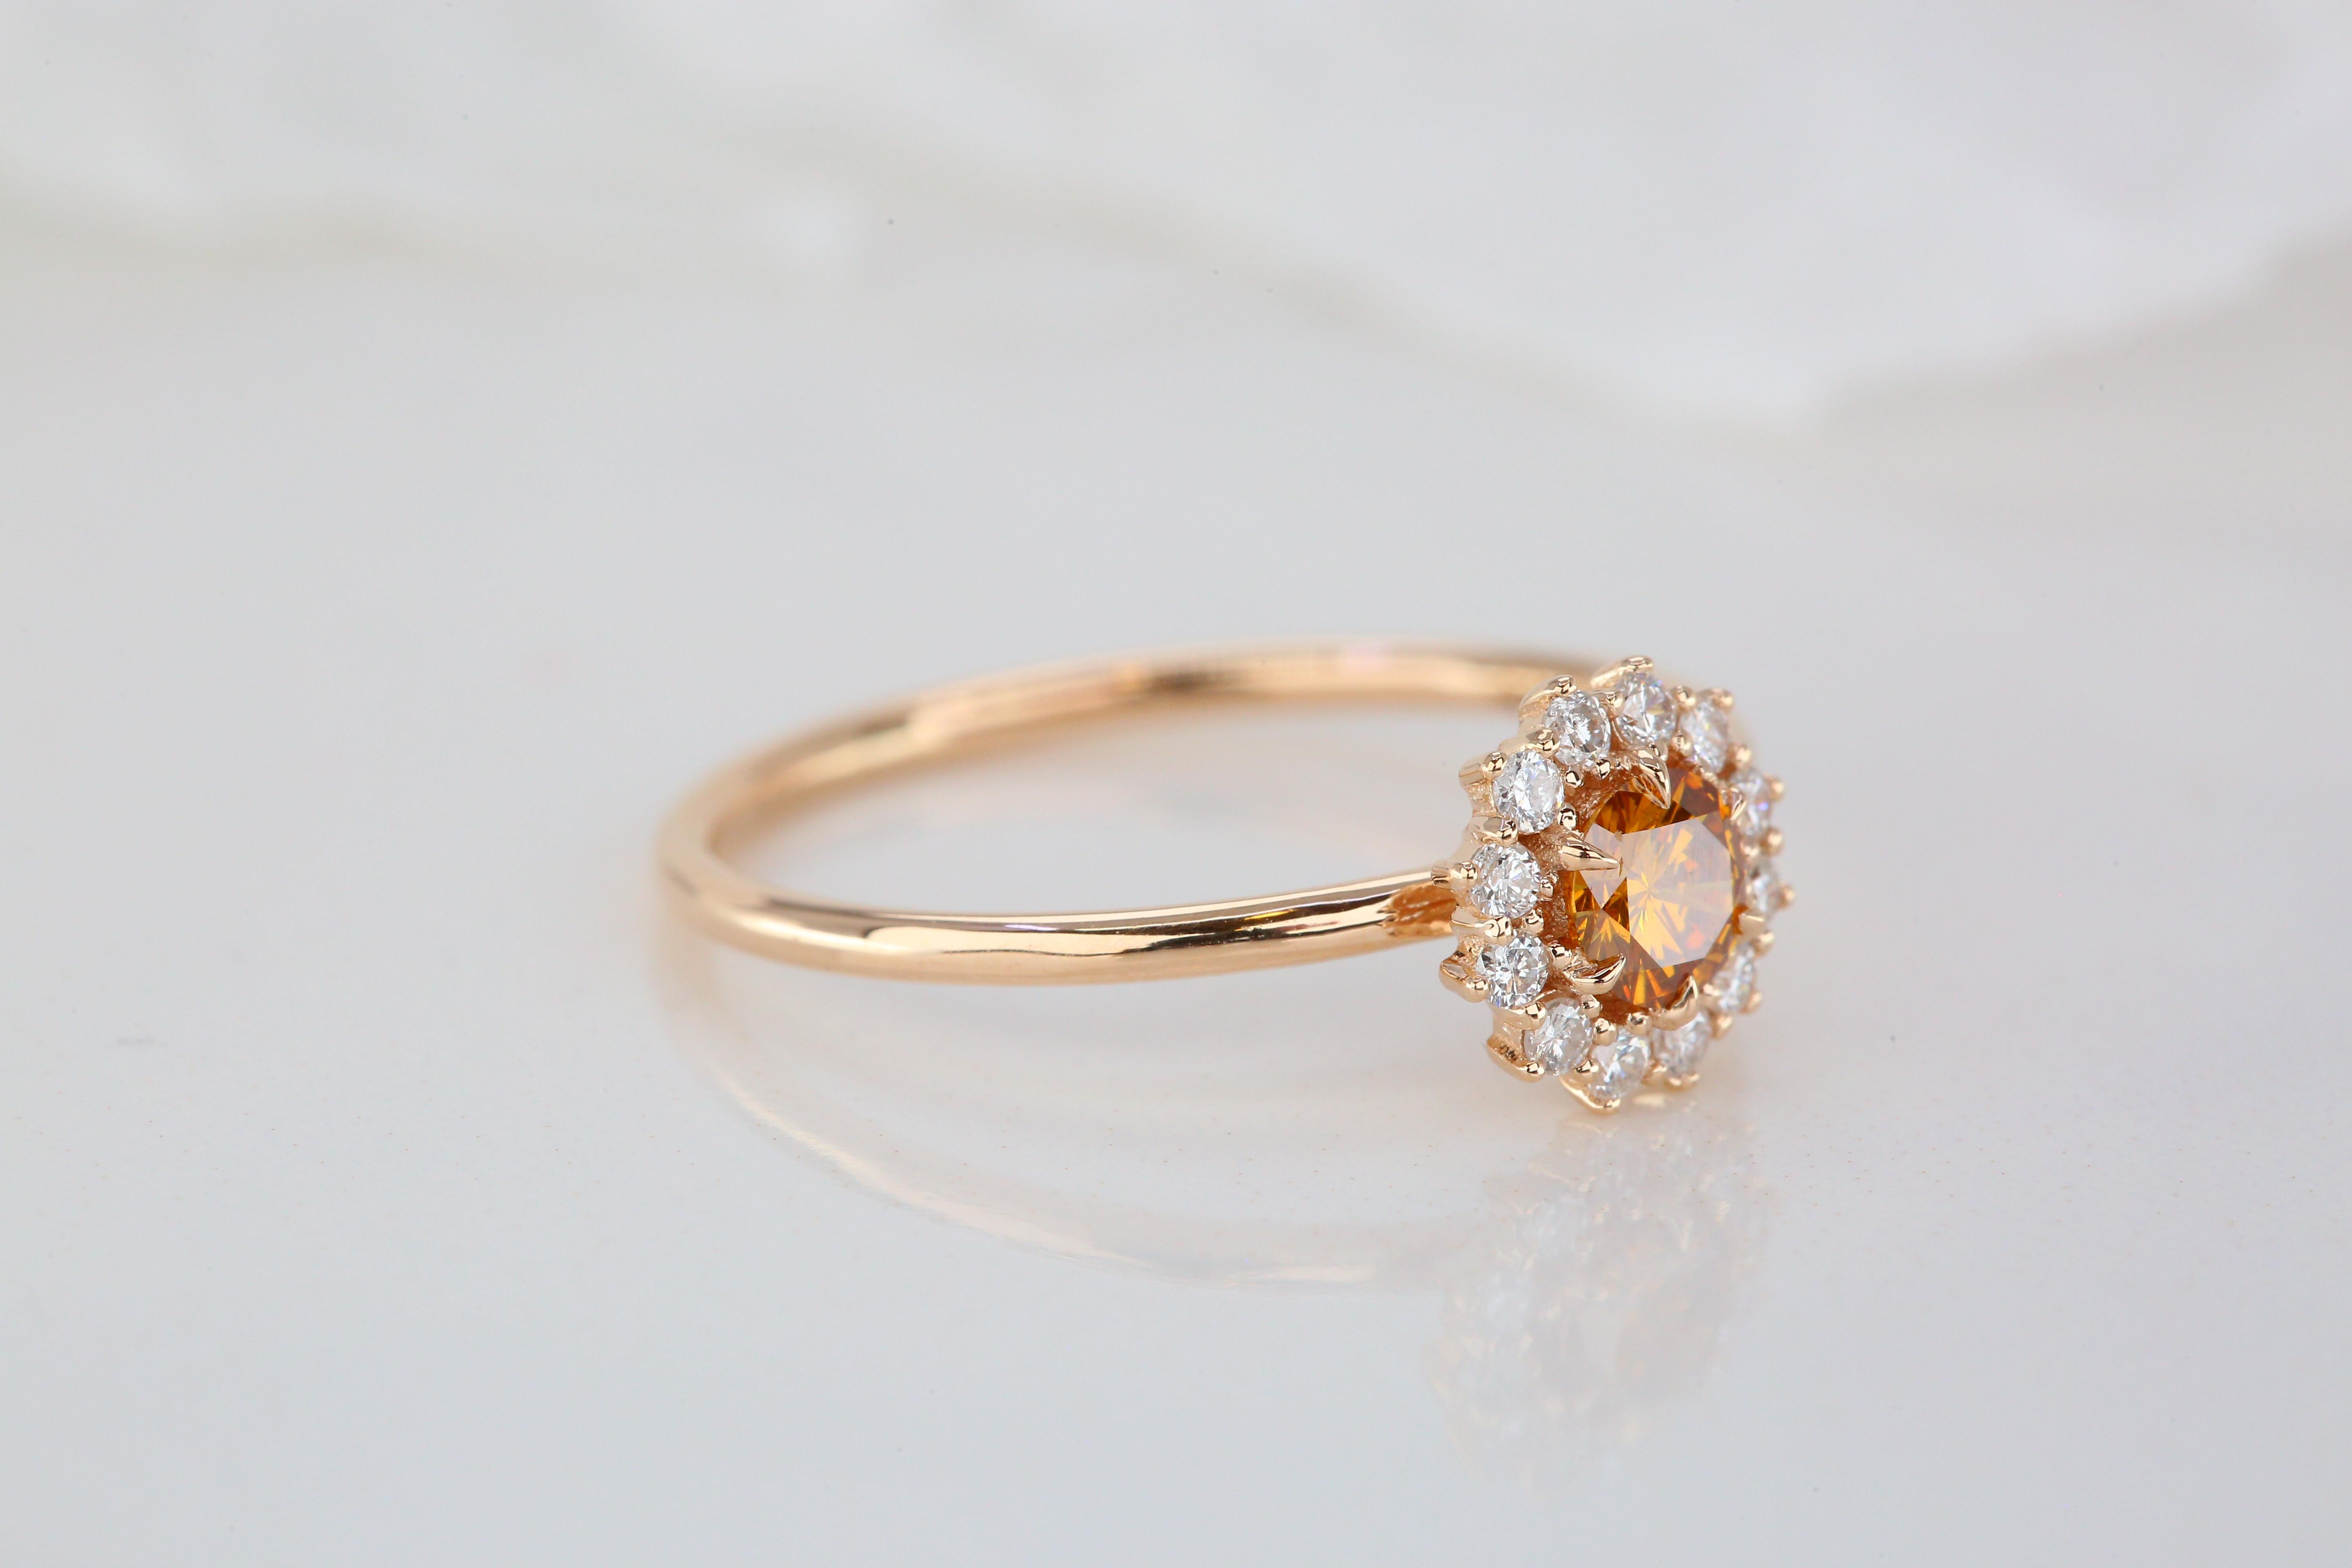 For Sale:  GIA 0.24 Ct. Fancy Deep Yellow-Orange Diamond 14K Gold Solitaire Ring 5